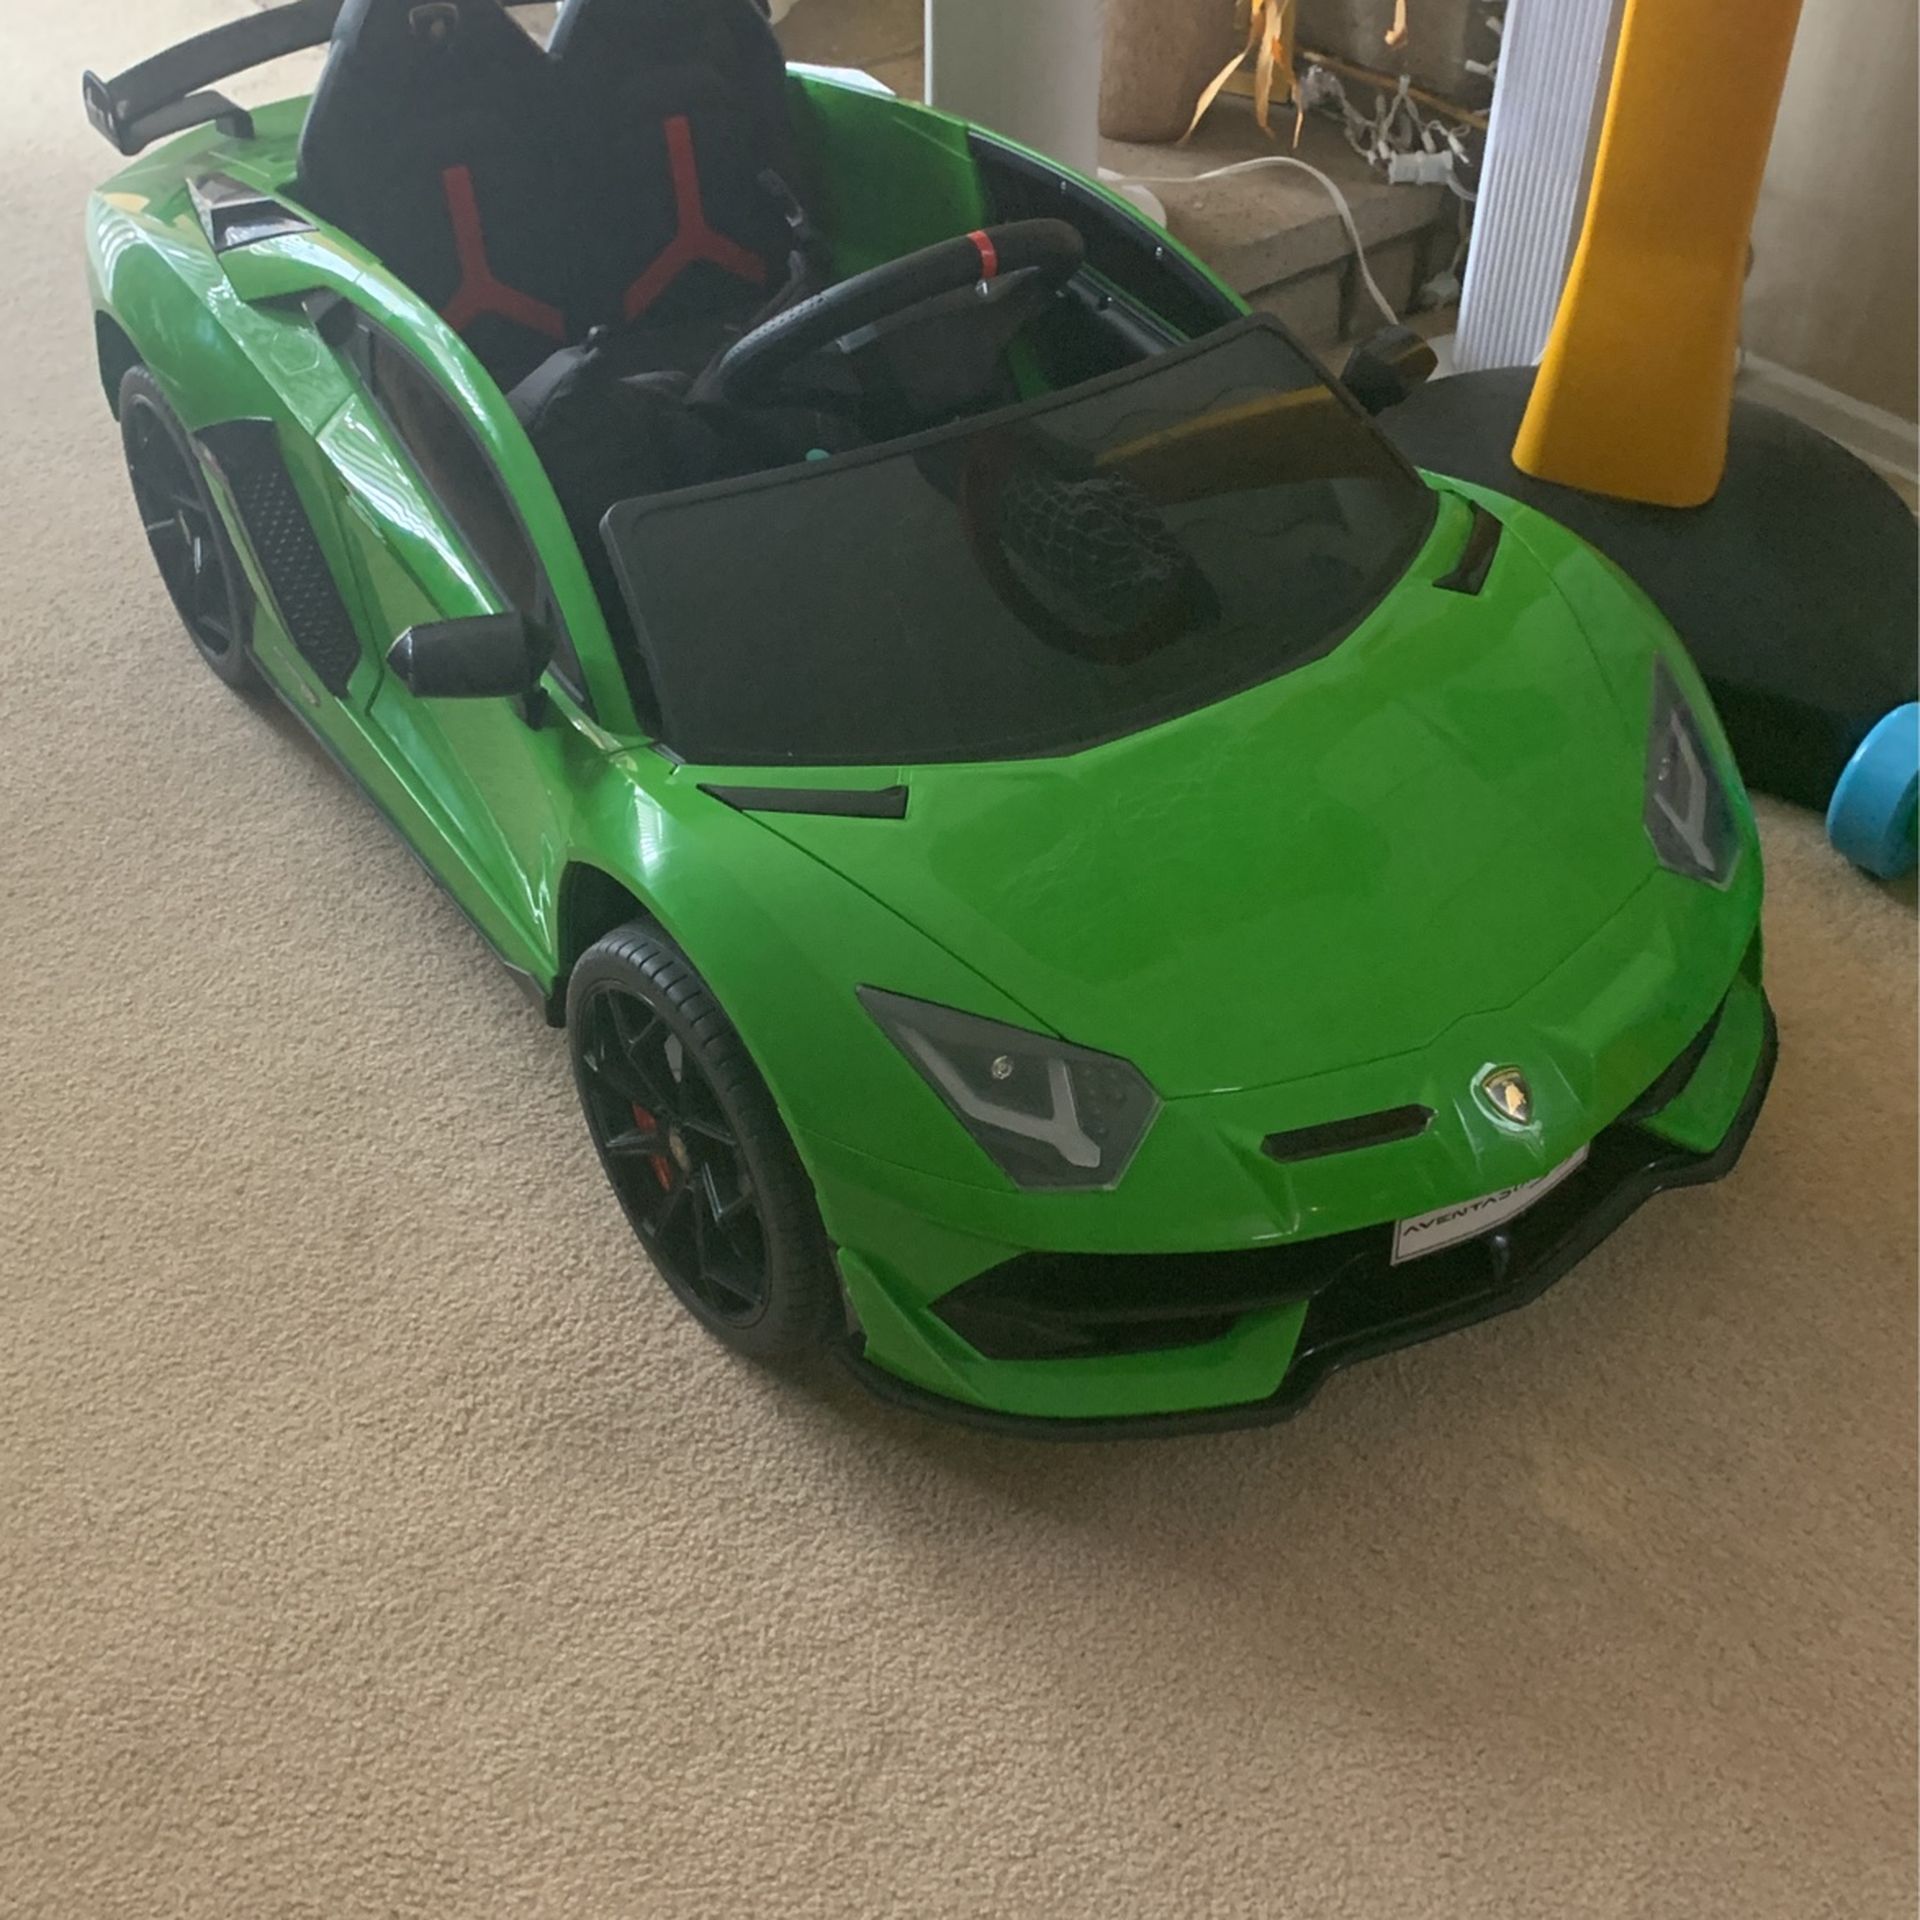 Remote Control Car For Babies!!! (Lambo)